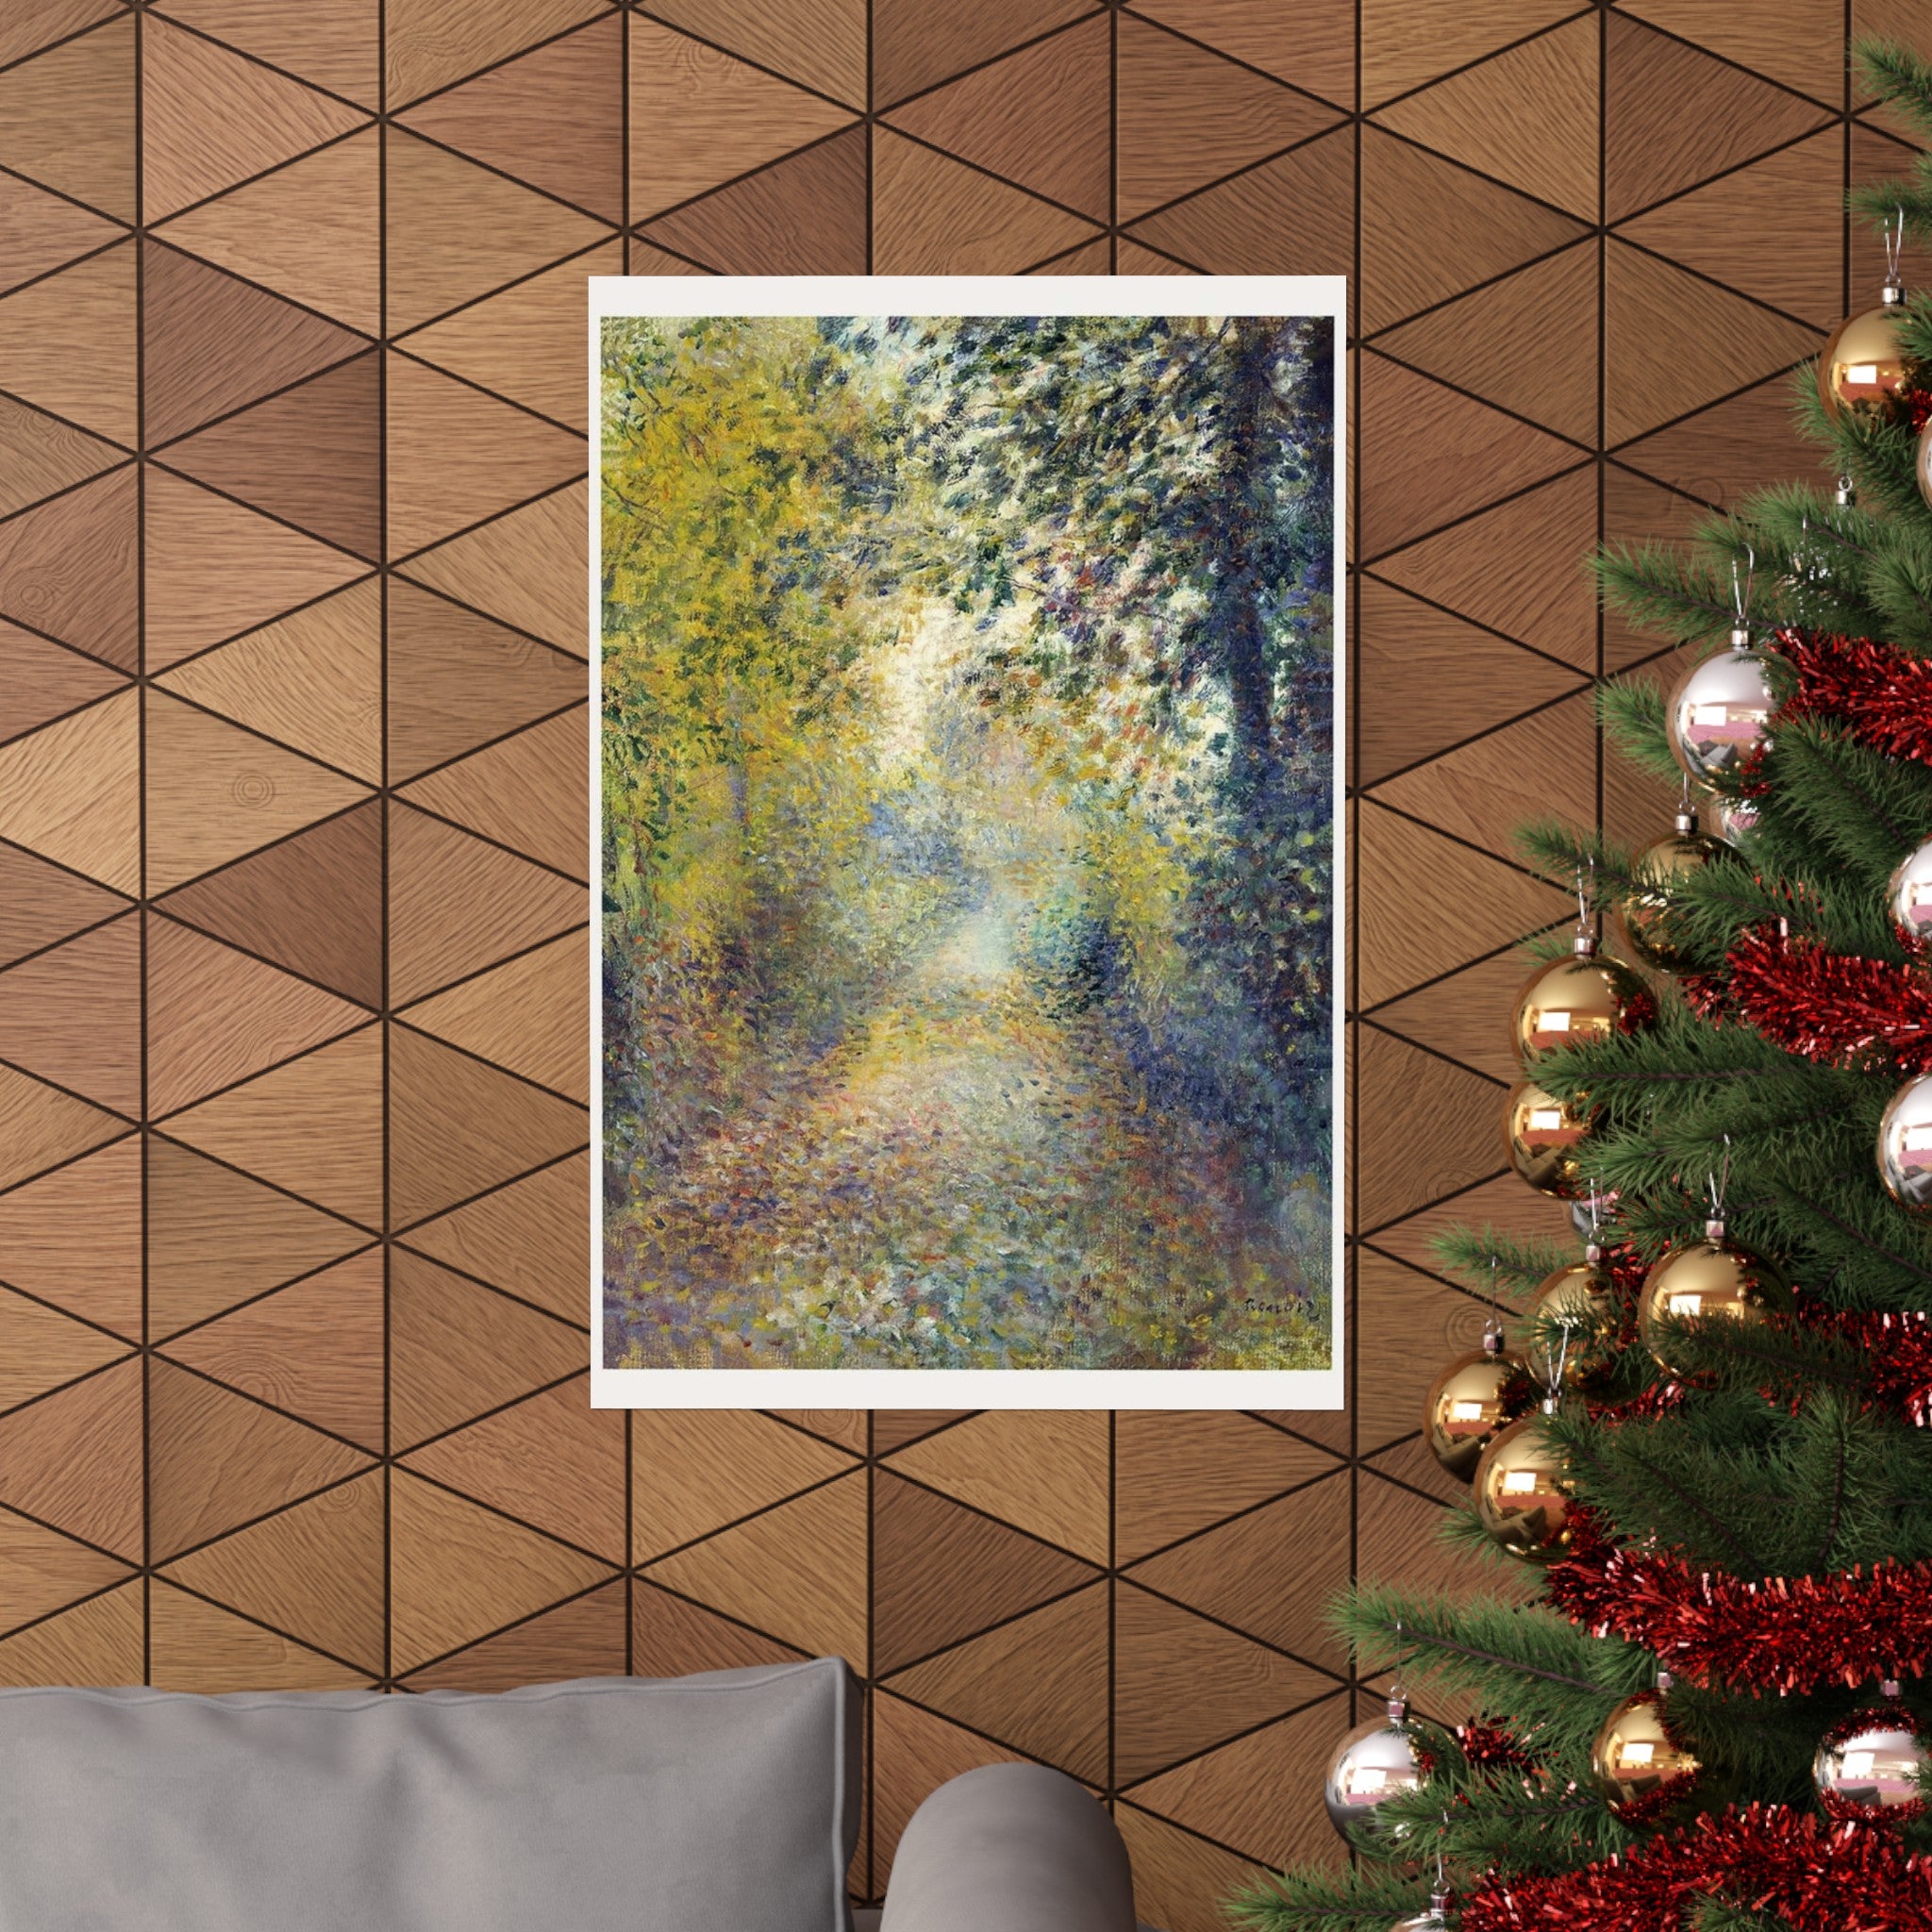 Renoir In The Woods Retro Wall Print | France | Painting | Impressionism